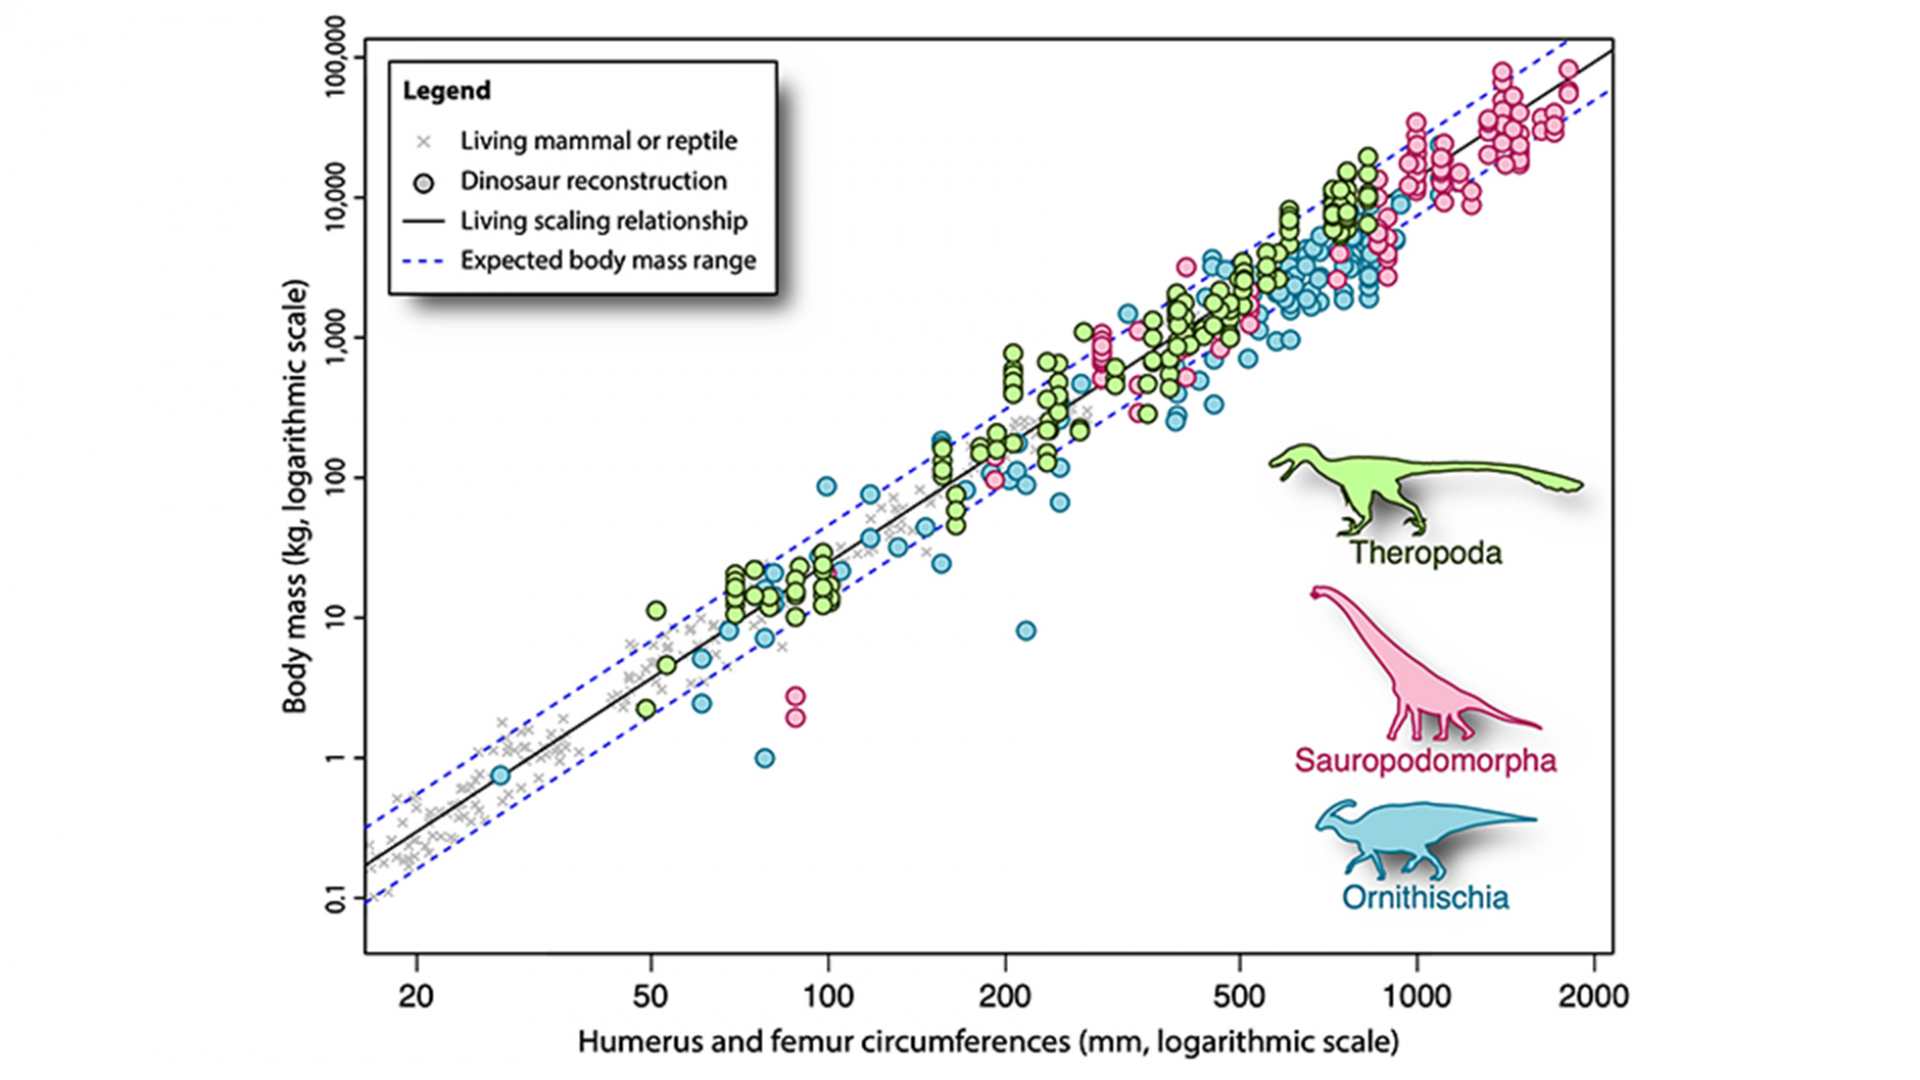 Dinosaur life reconstruction masses projected onto the limb circumference to body mass scaling relationship of living mammals and reptiles.